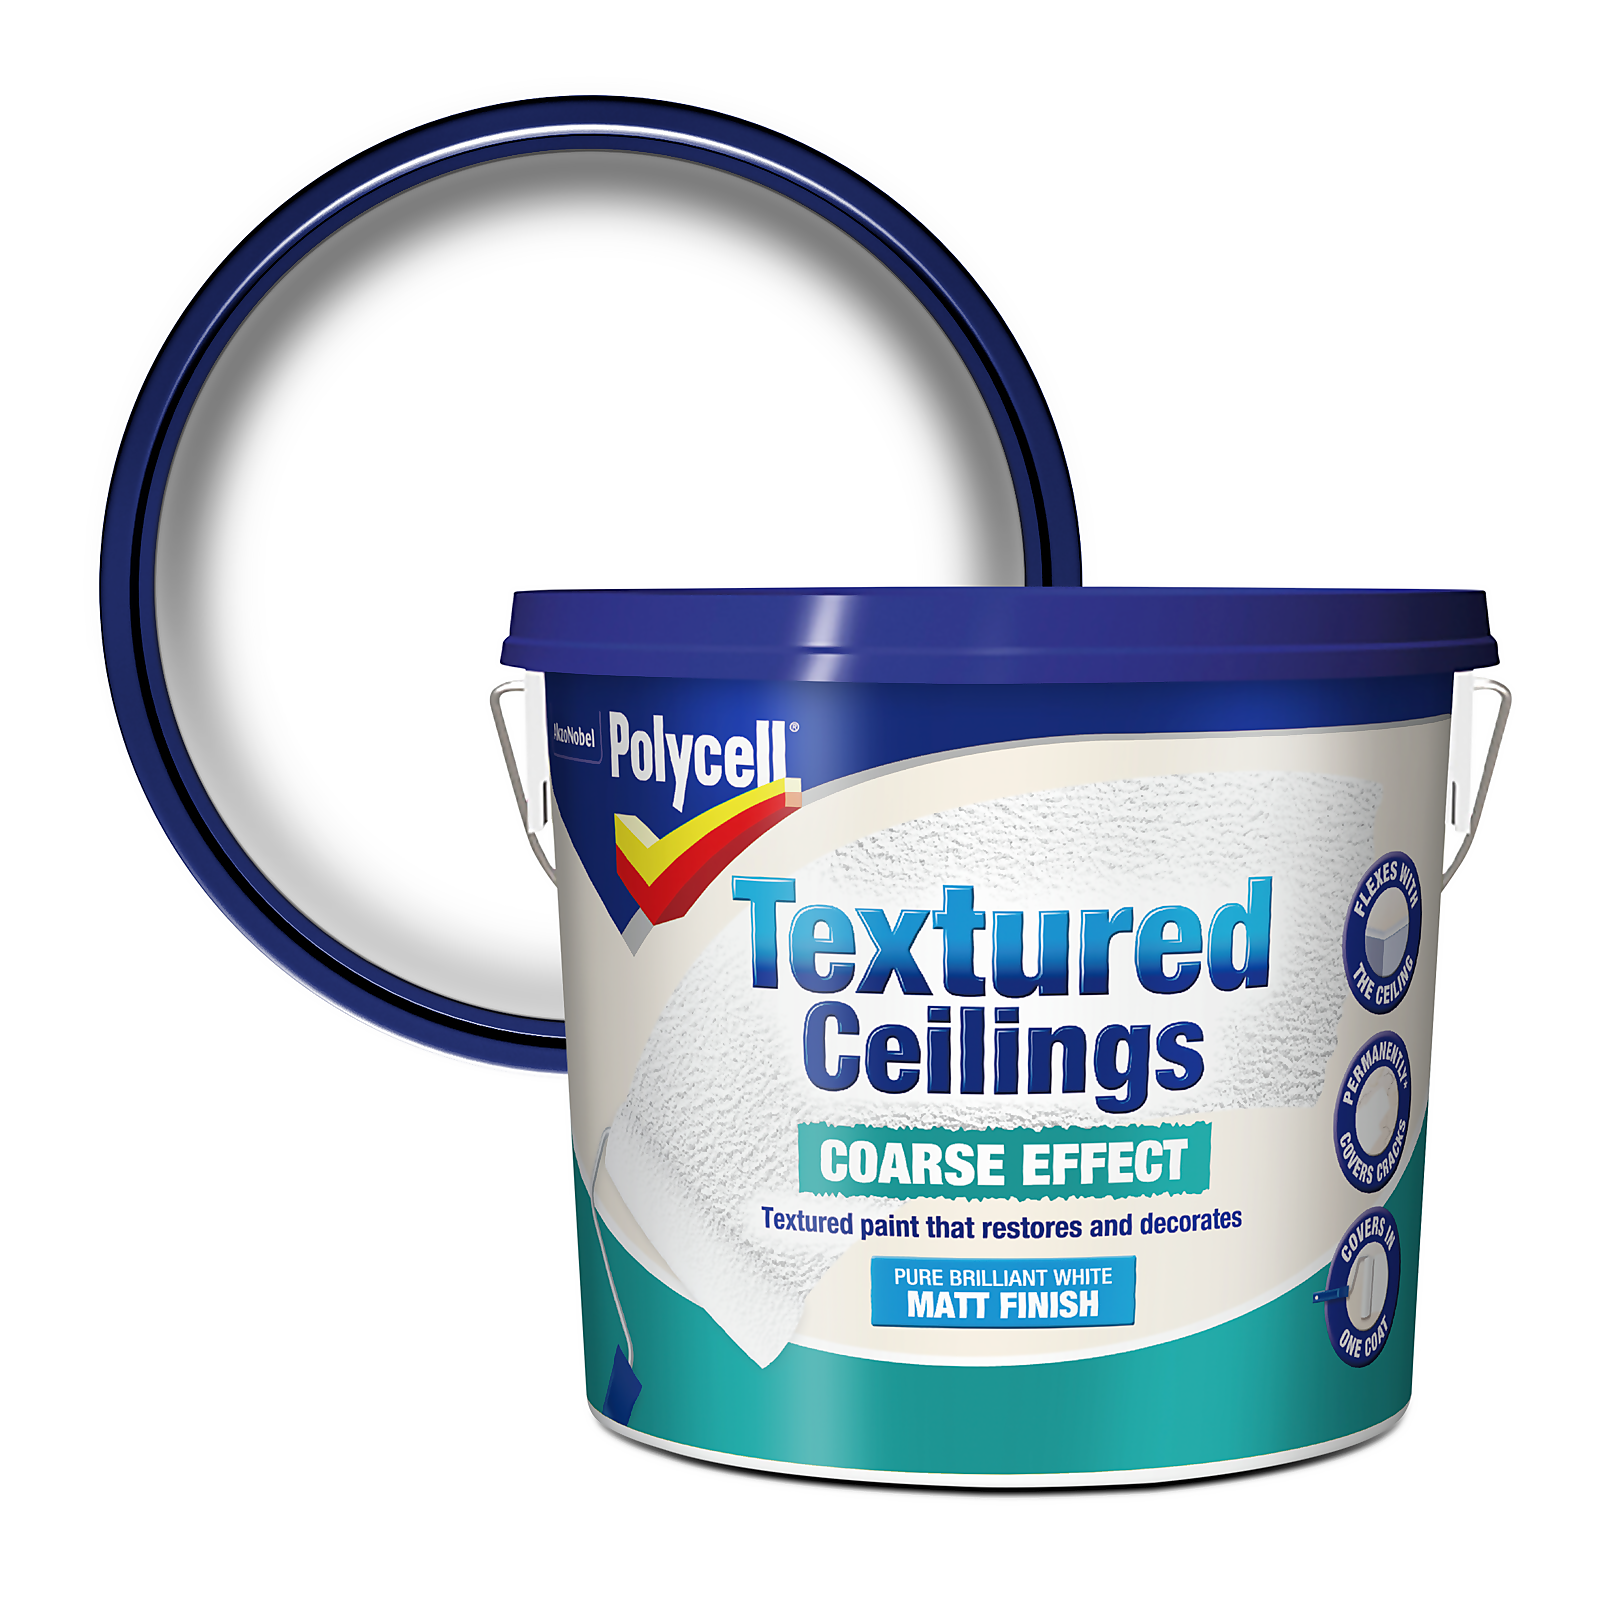 Photo of Polycell Coarse Effect Textured Ceiling Paint - 5l